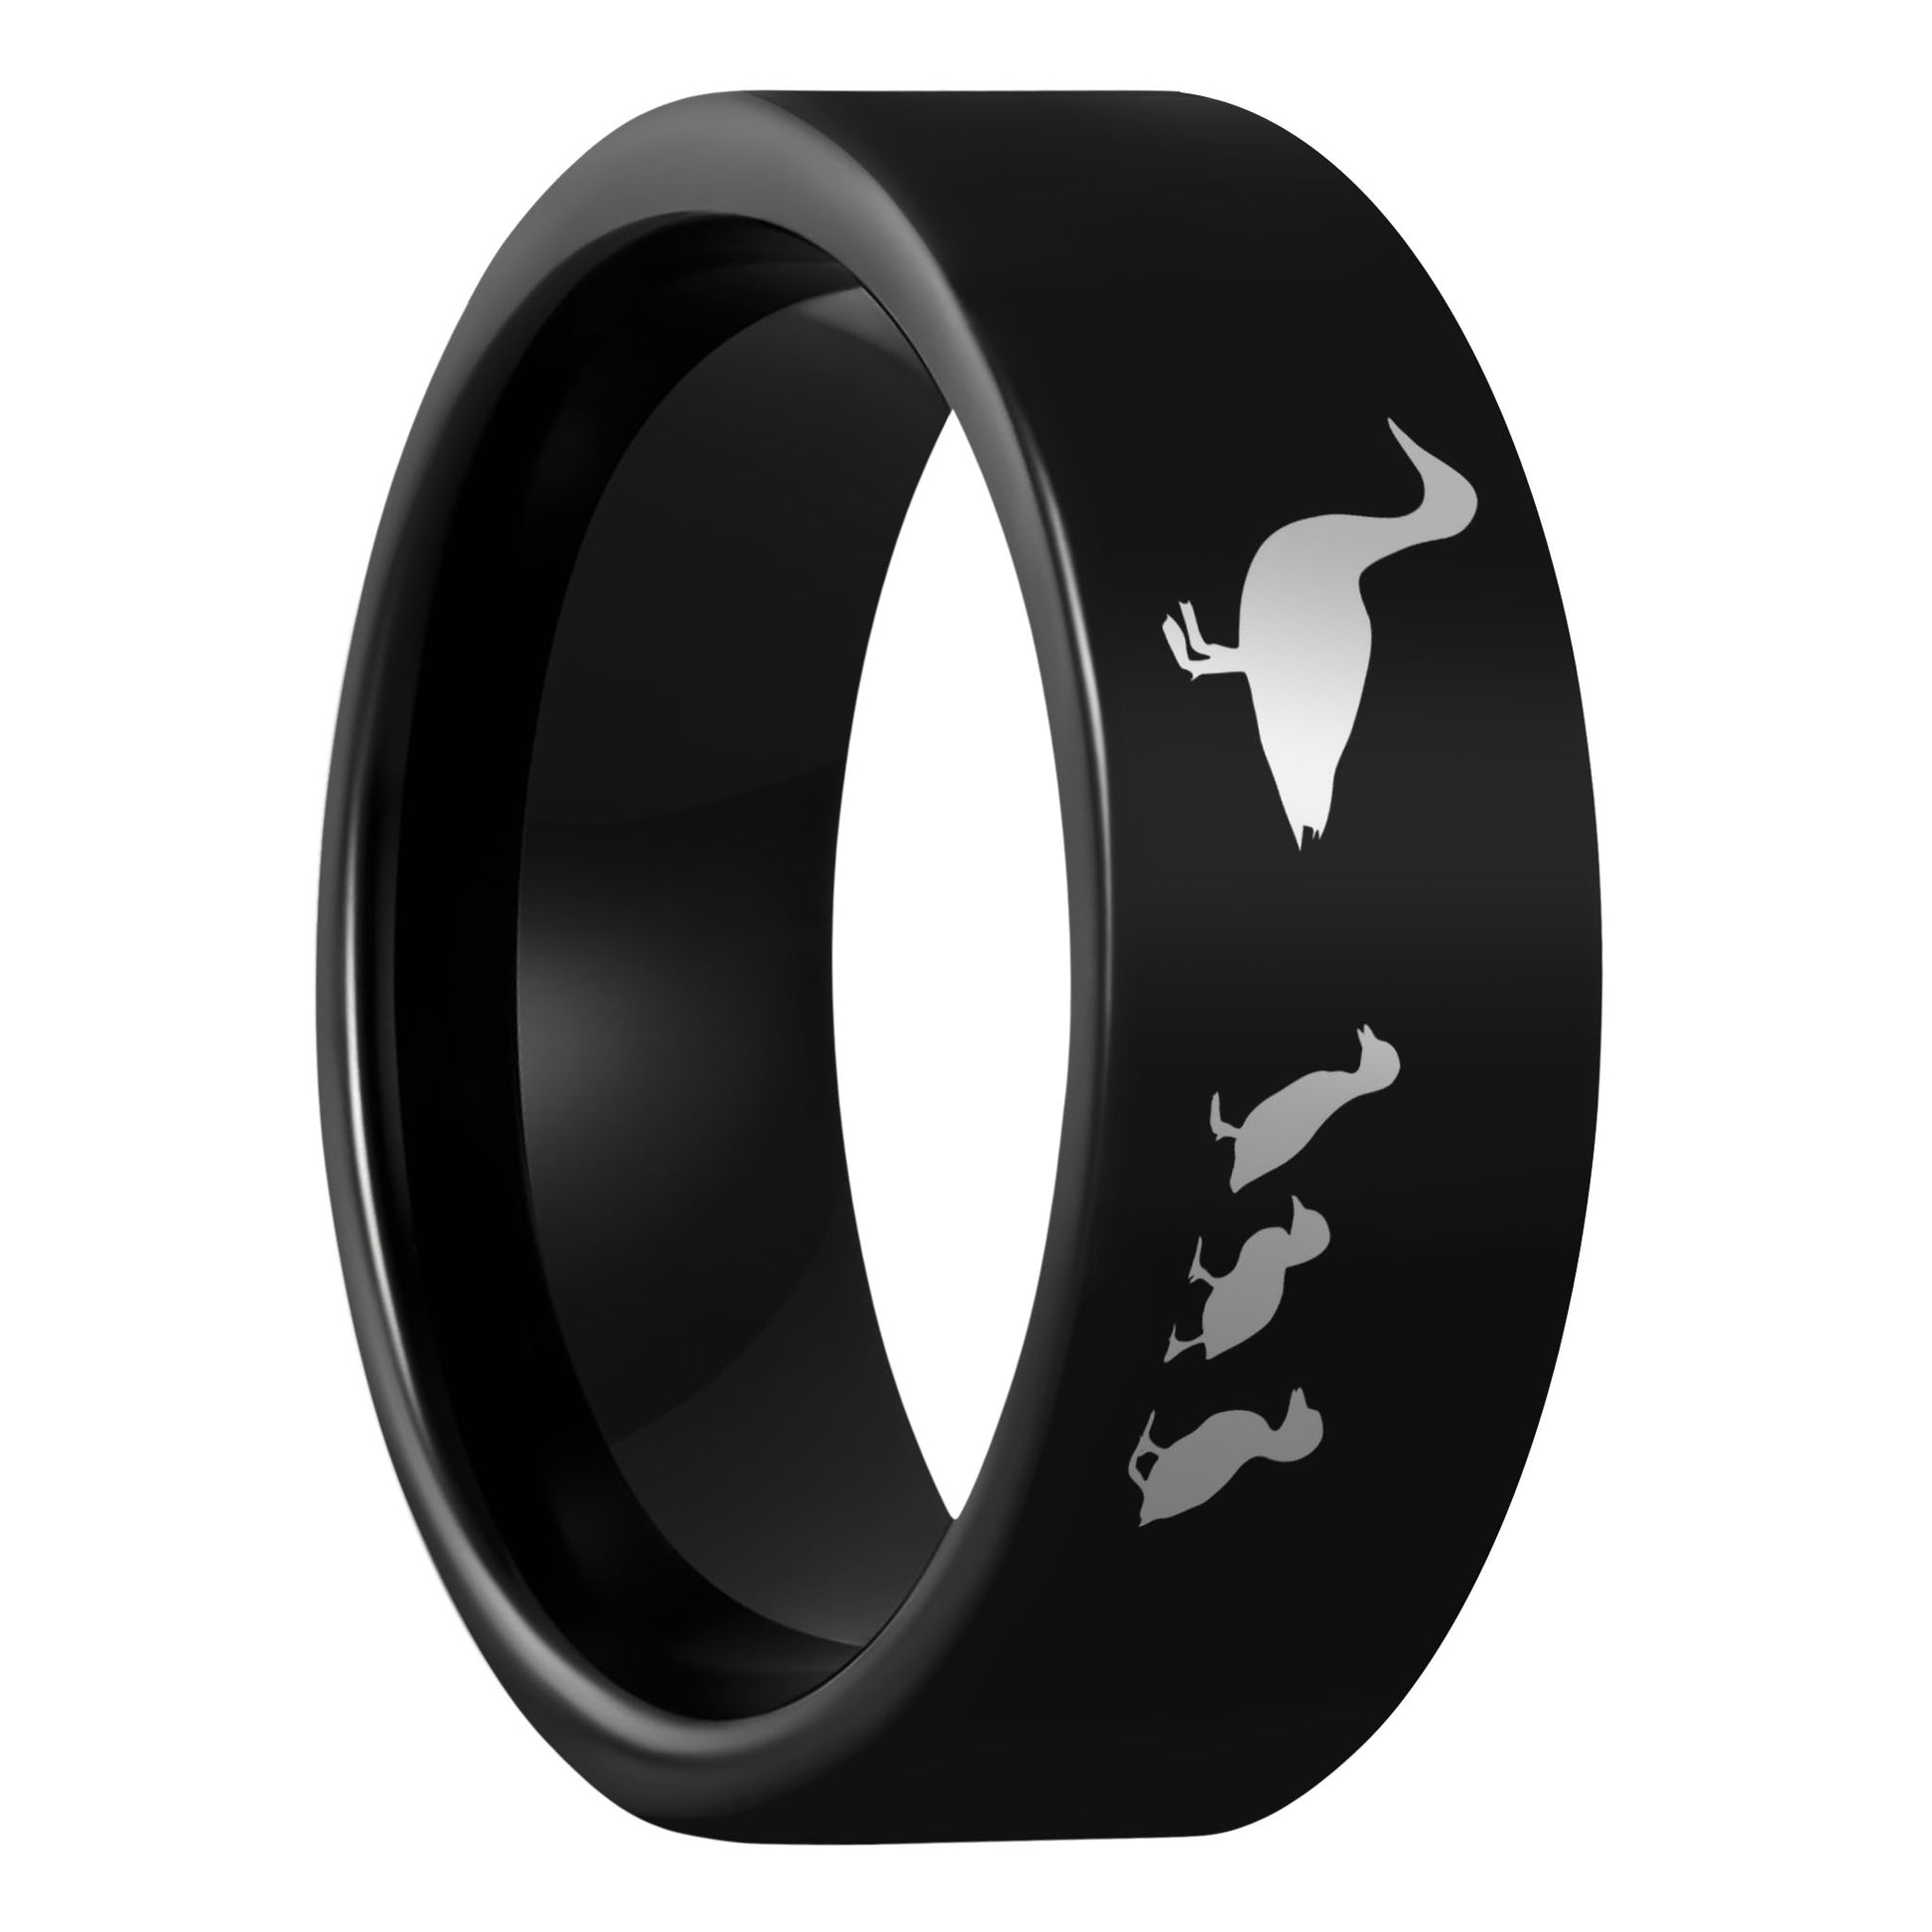 One Duck & Ducklings Black Tungsten Men's Wedding Band displayed on a plain white background